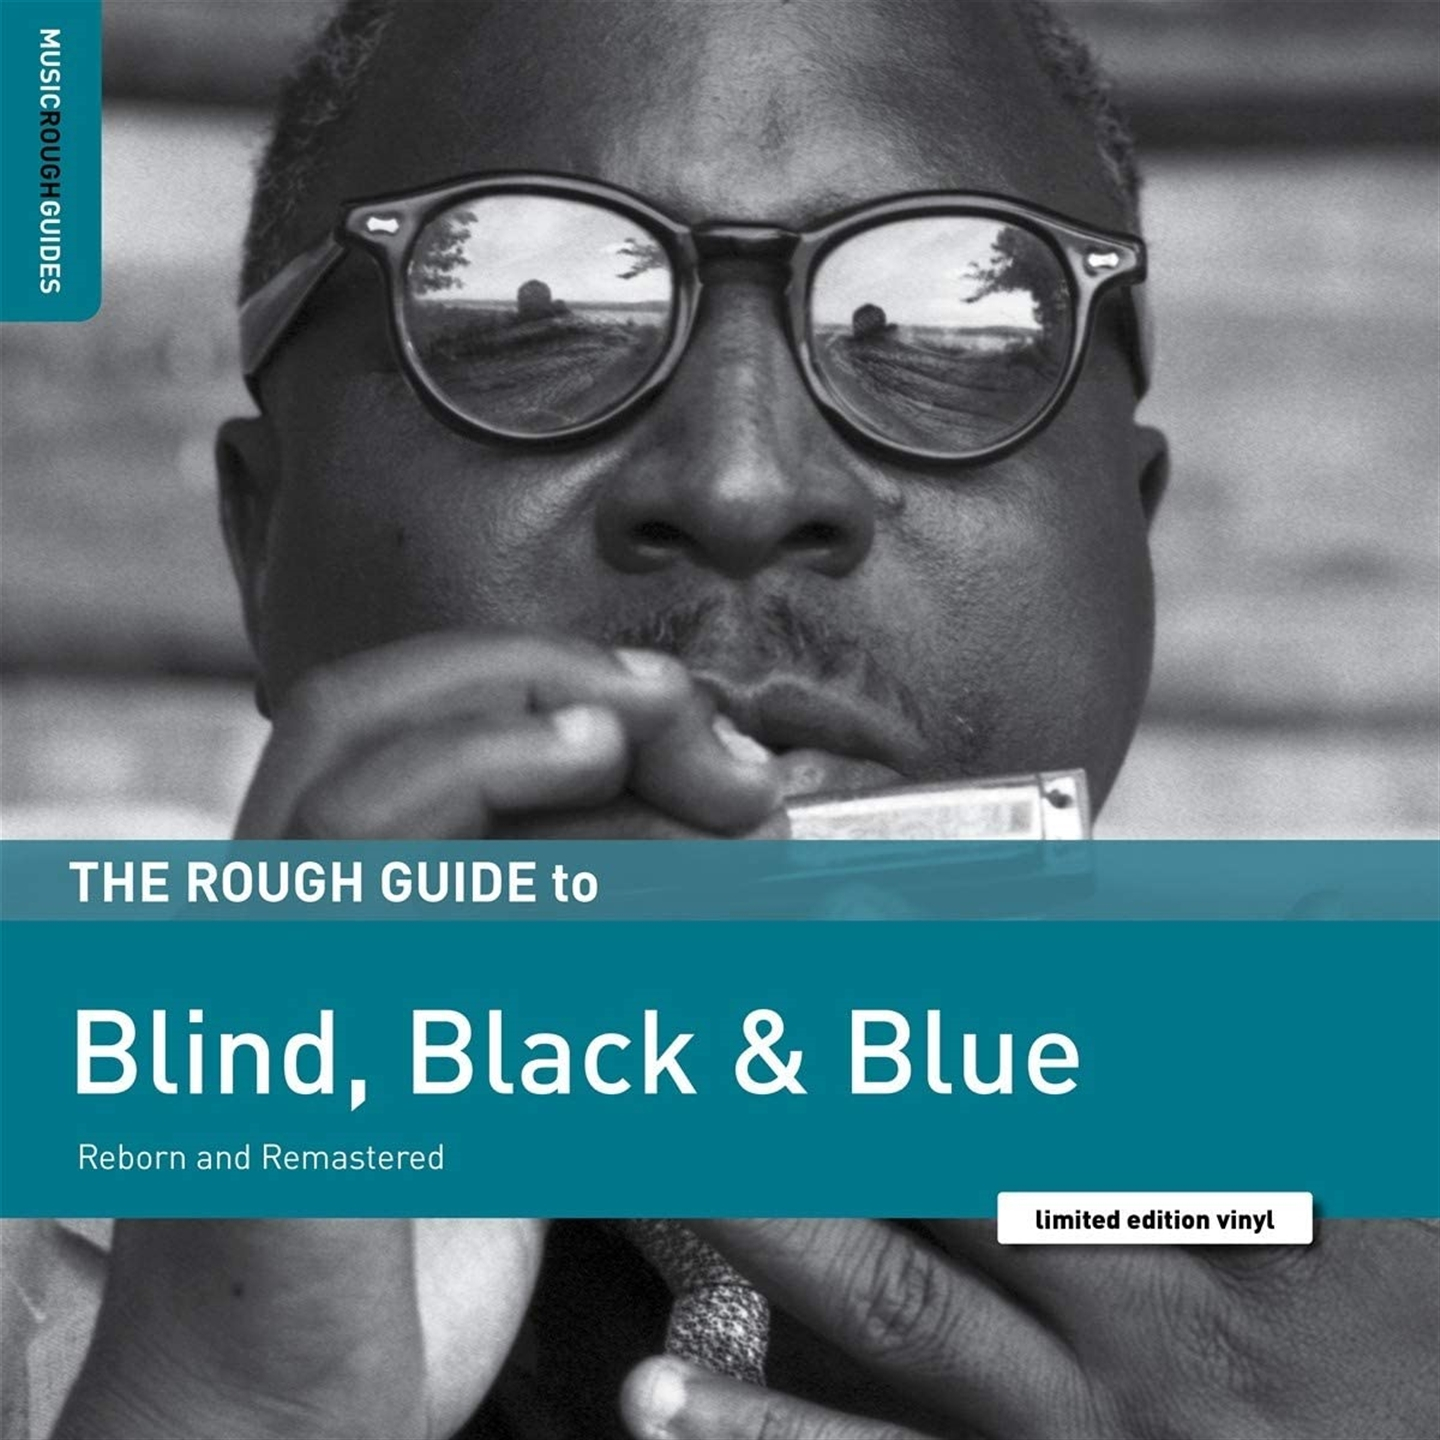 THE ROUGH GUIDE TO BLIND, BLACK & BLUE [LP]